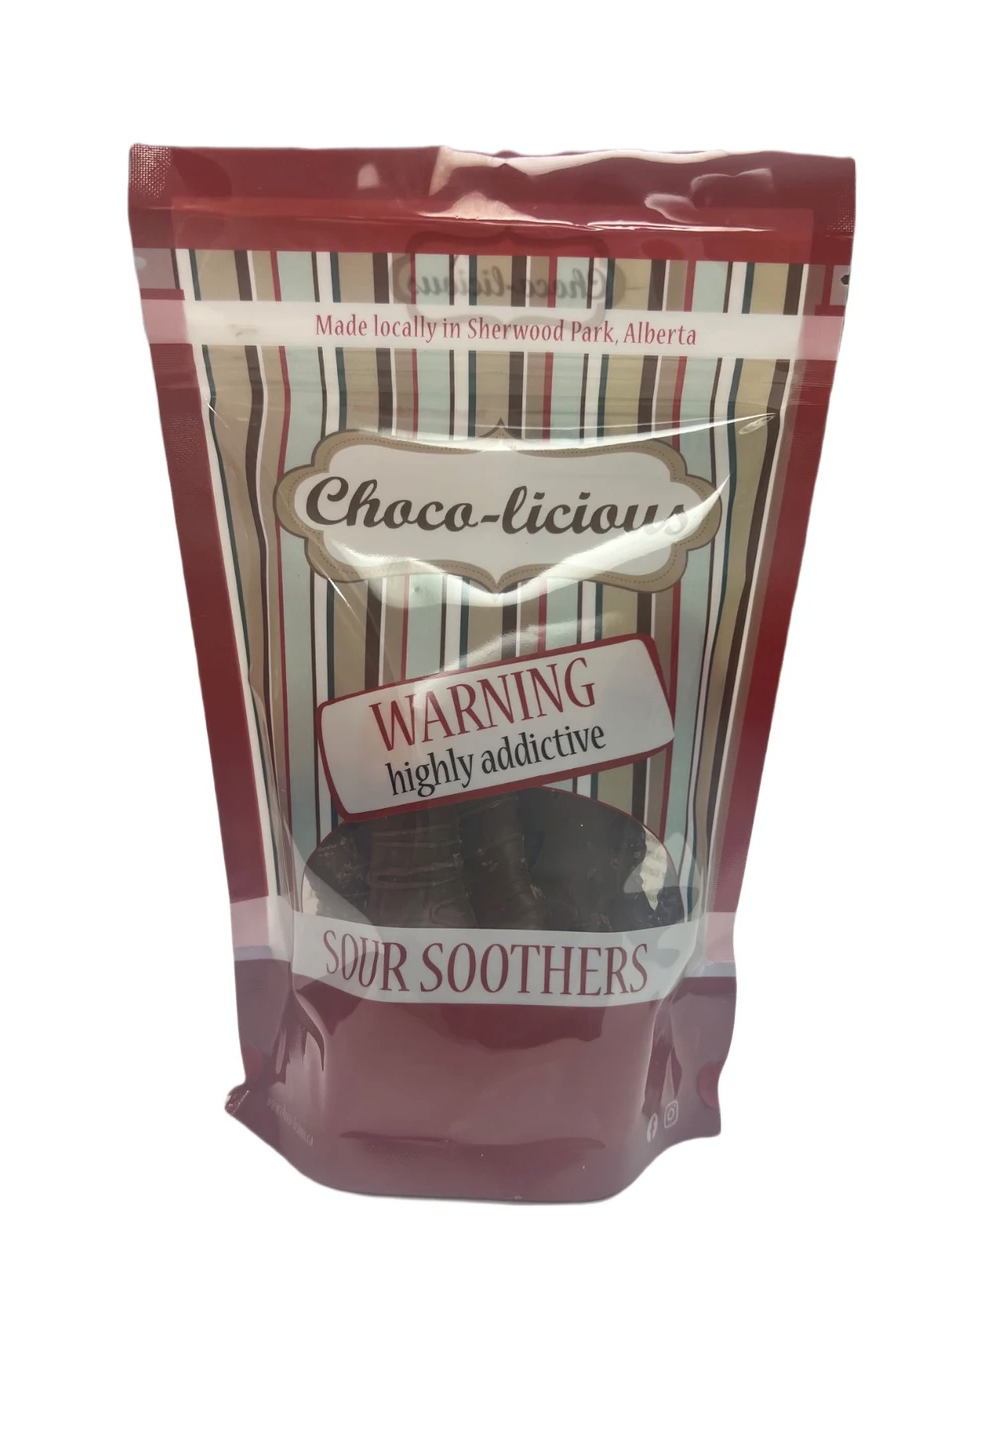 Chocolicious Sour Soothers Covered in Chocolate